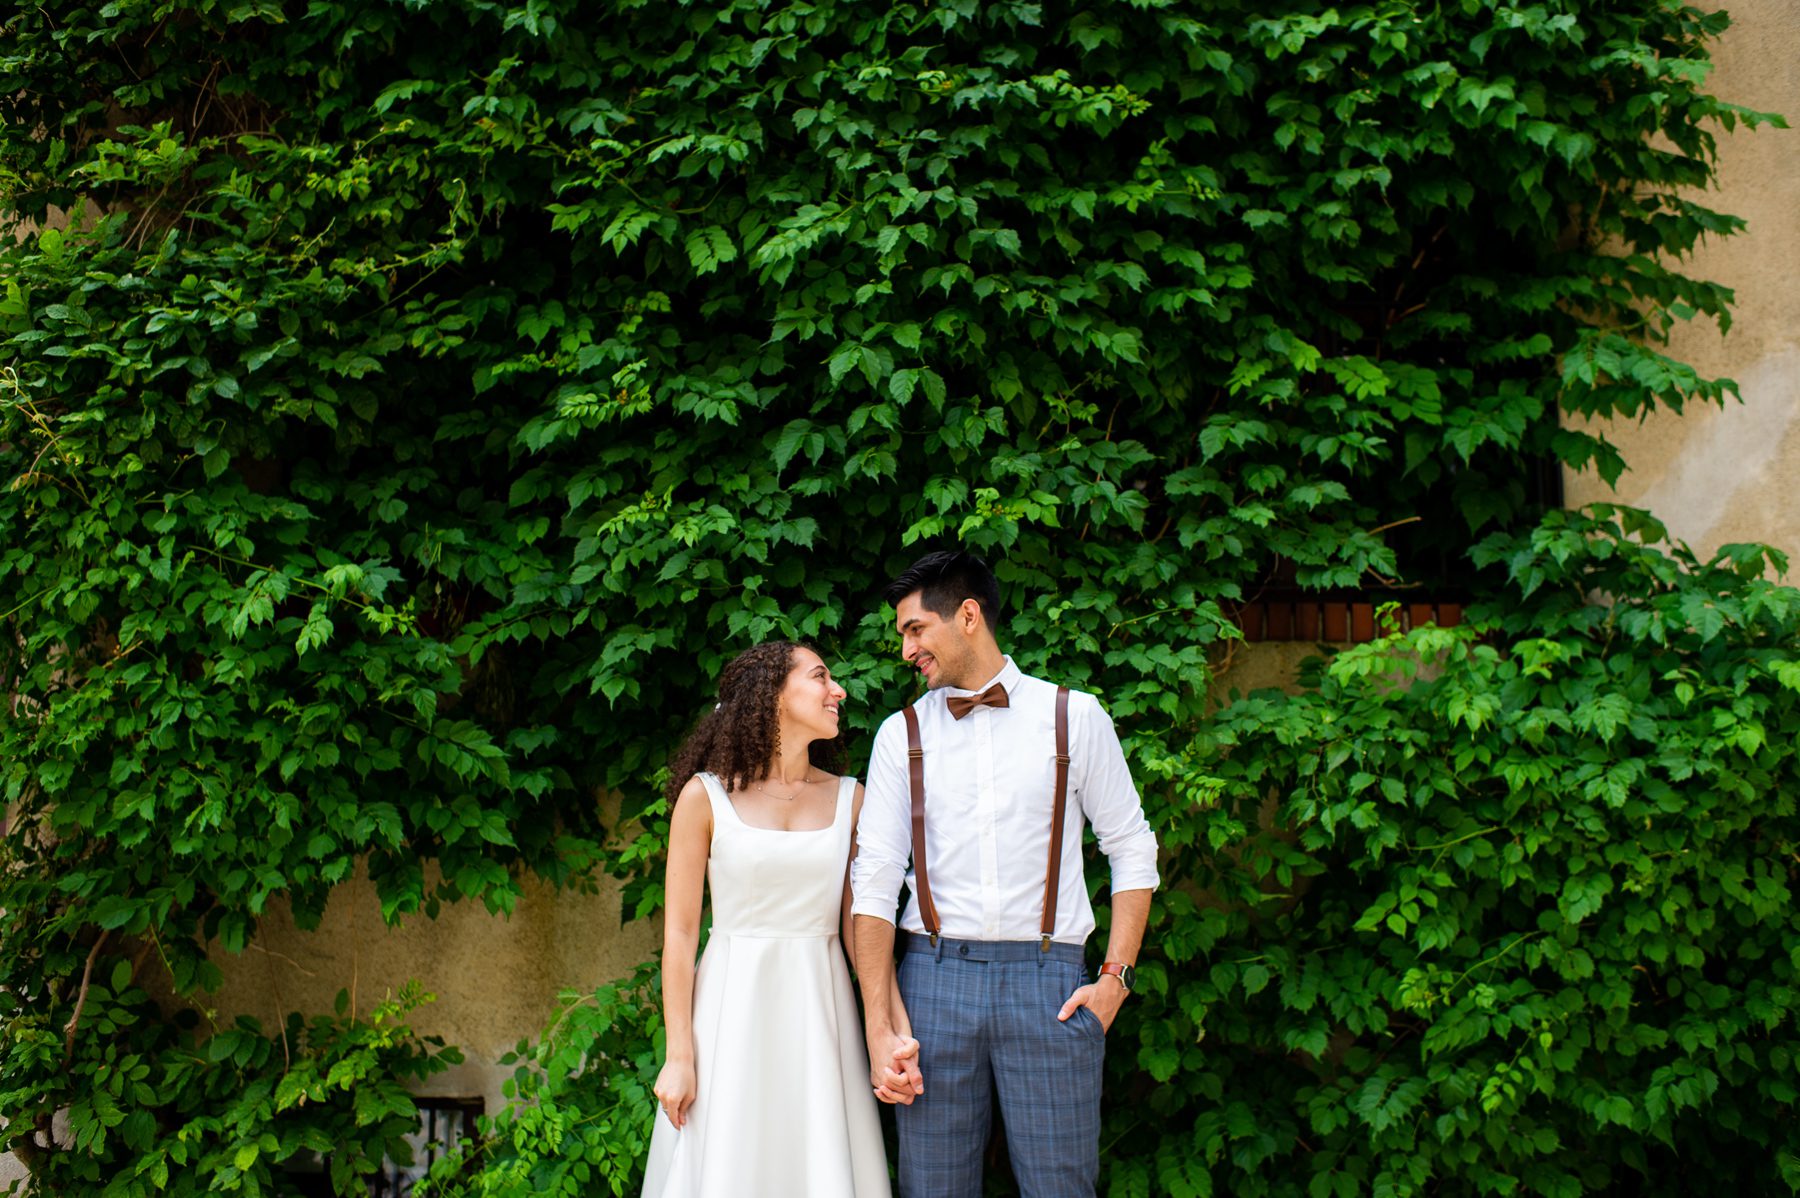 Unique Places for Elopement Photos in NYC